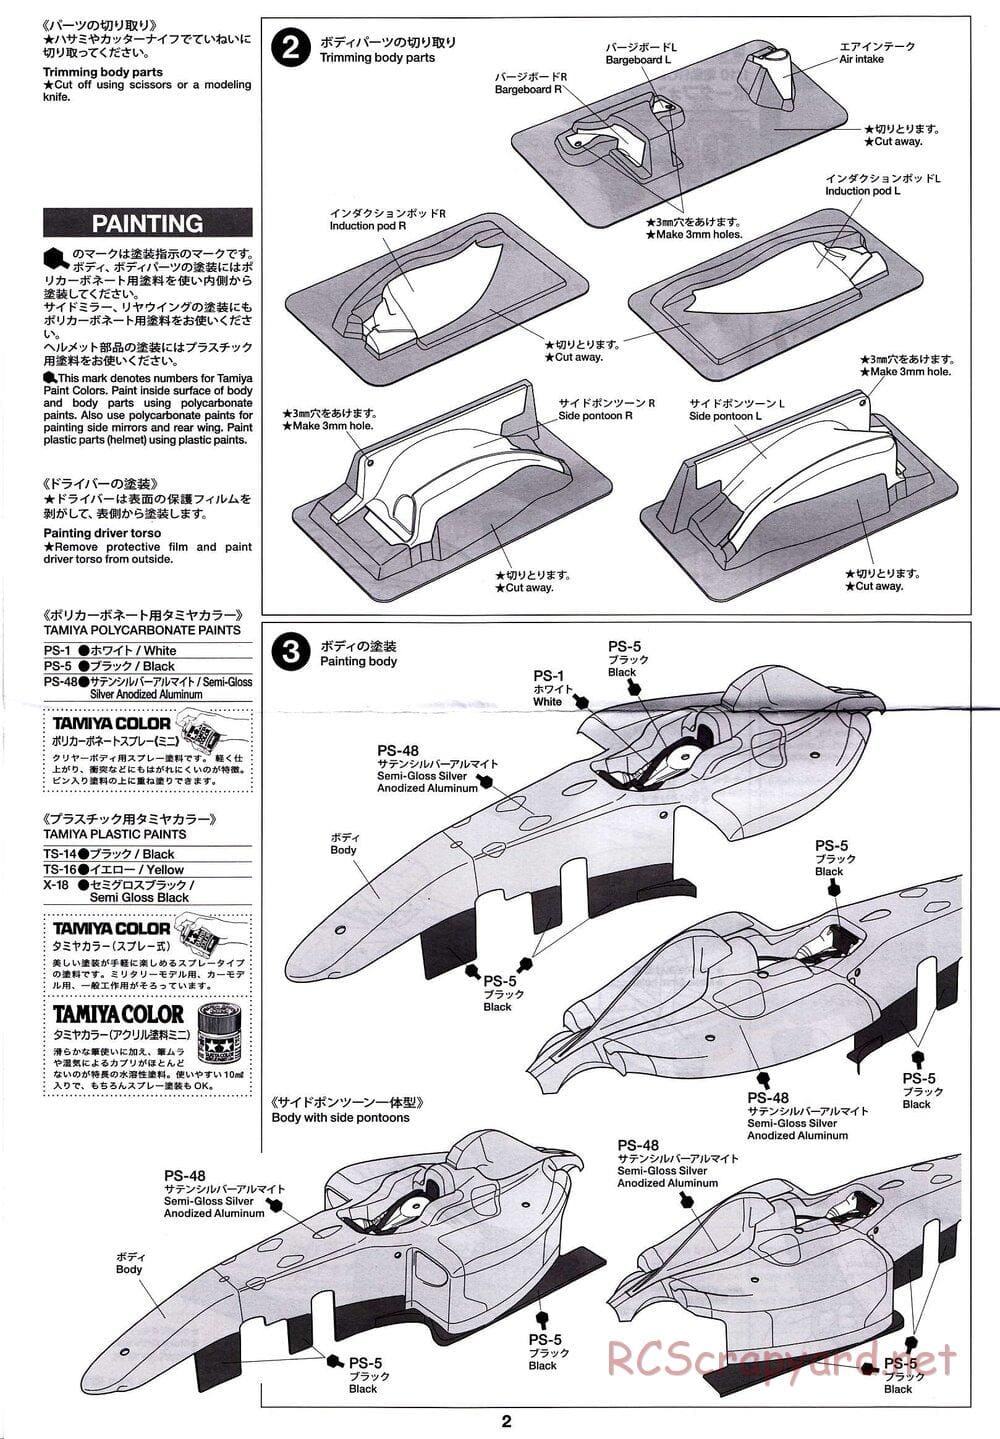 Tamiya - Vodafone McLaren Mercedes MP4-24 - F104 Chassis - Body Manual - Page 2